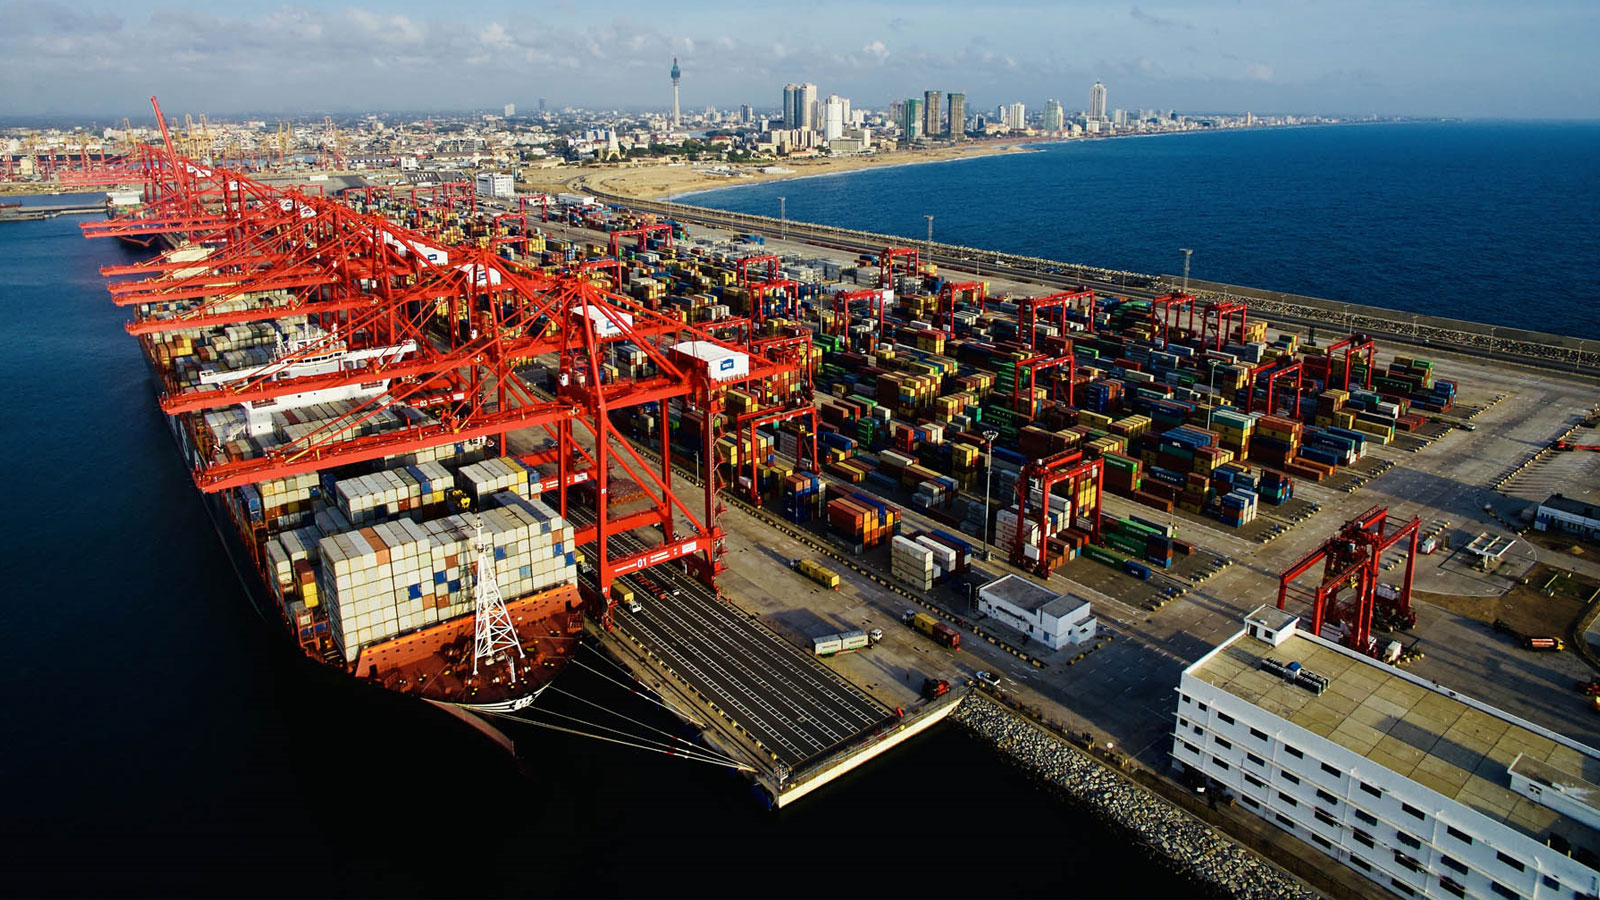 COLOMBO INTERNATIONAL CONTAINER TERMINALS LTD